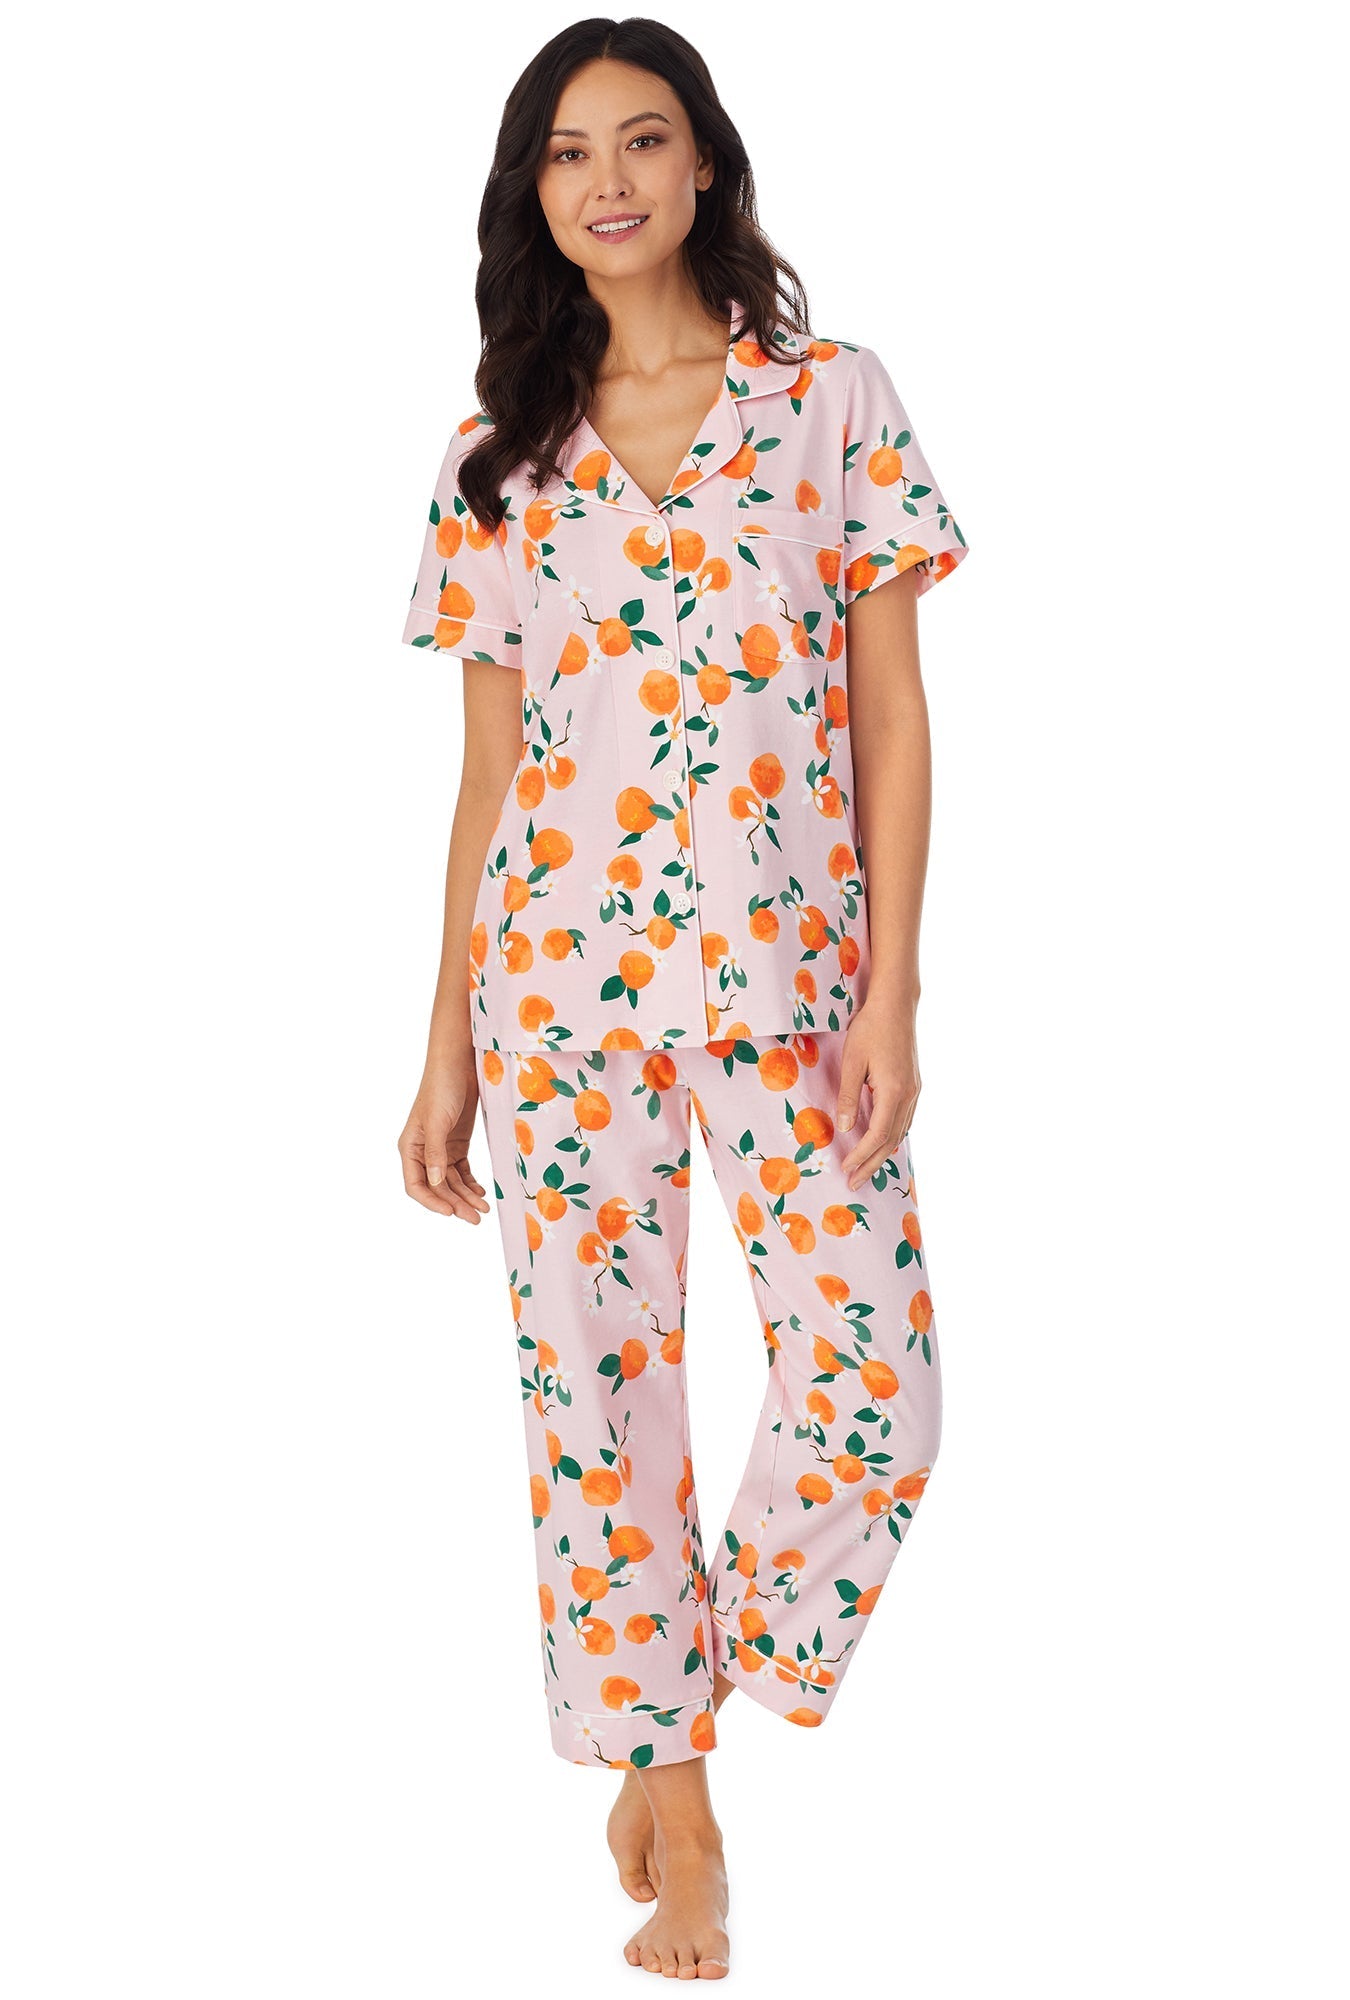 A lady wearing a pink short sleeve pj set with orange blossom pattern.